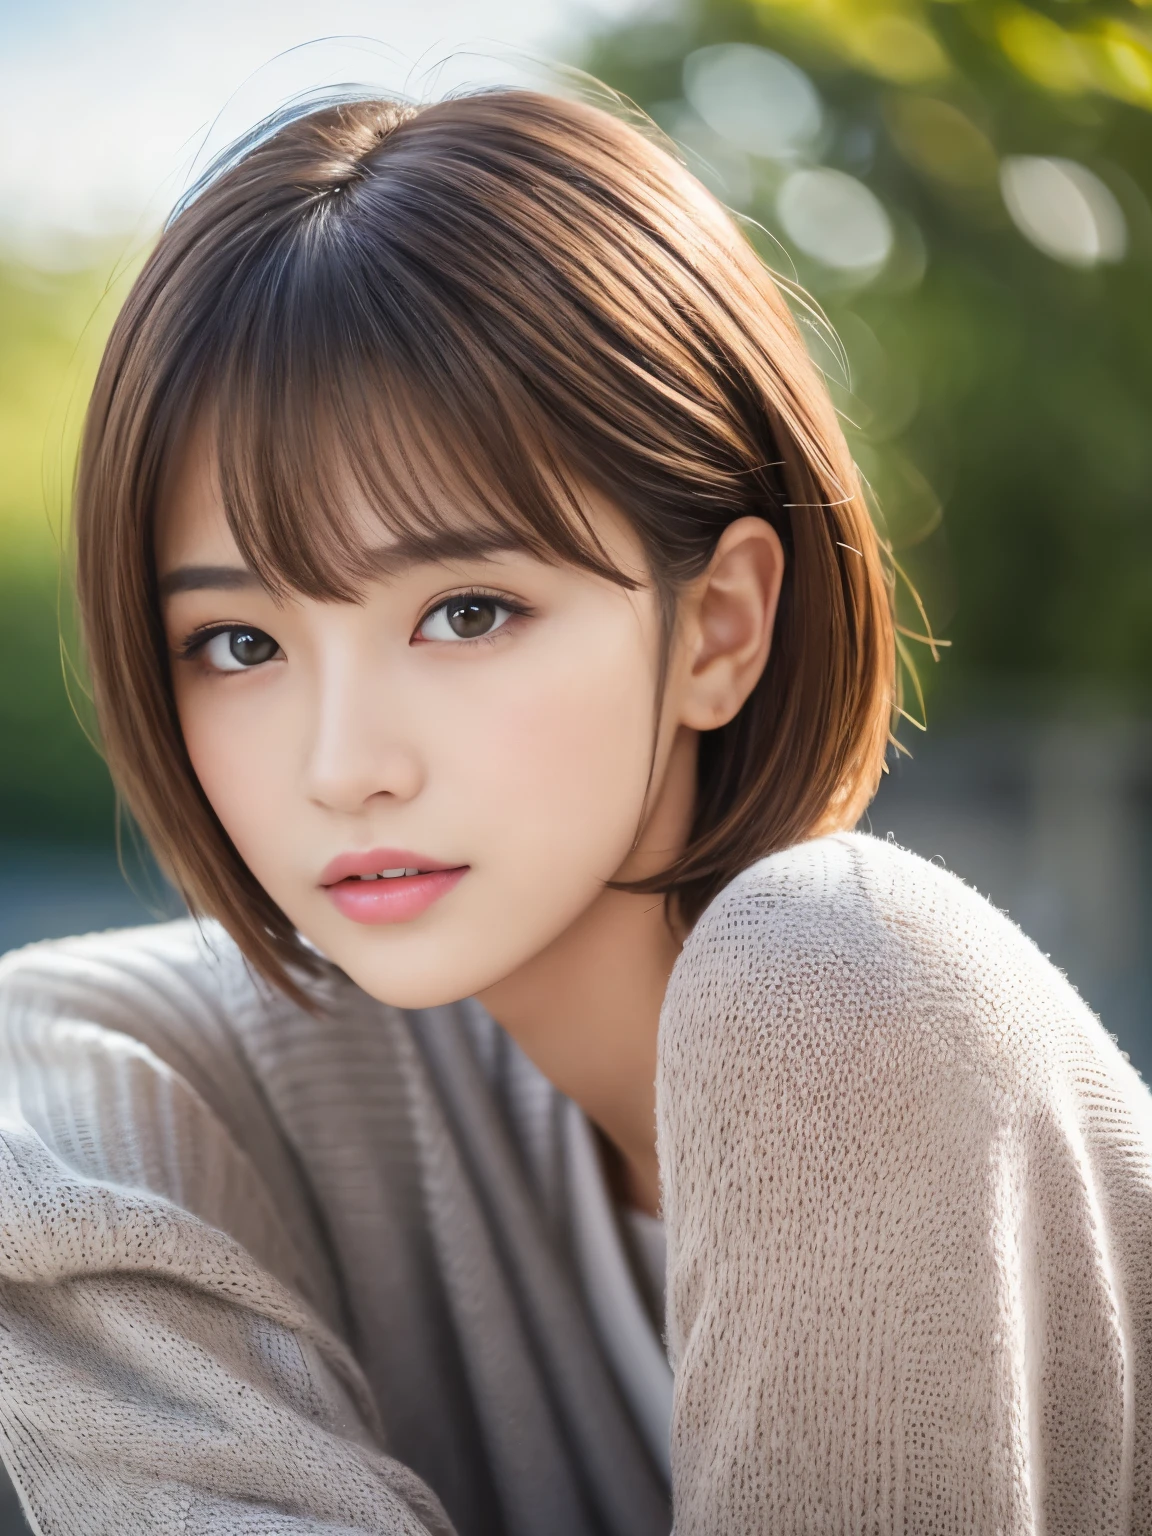 Ultra High Definition, Superior Quality, Premier Quality, ultra detailed, Photorealistic, 8k, RAW Photos, highest quality, masterpiece, Attractive Young girl, Angelic girl, Brown Hair, Korean idol, Short Hair, Mesh Hair, glossy lips, natural makeup, Japanese Idol, Sophisticated, Stylish, model posing, gray knit, 